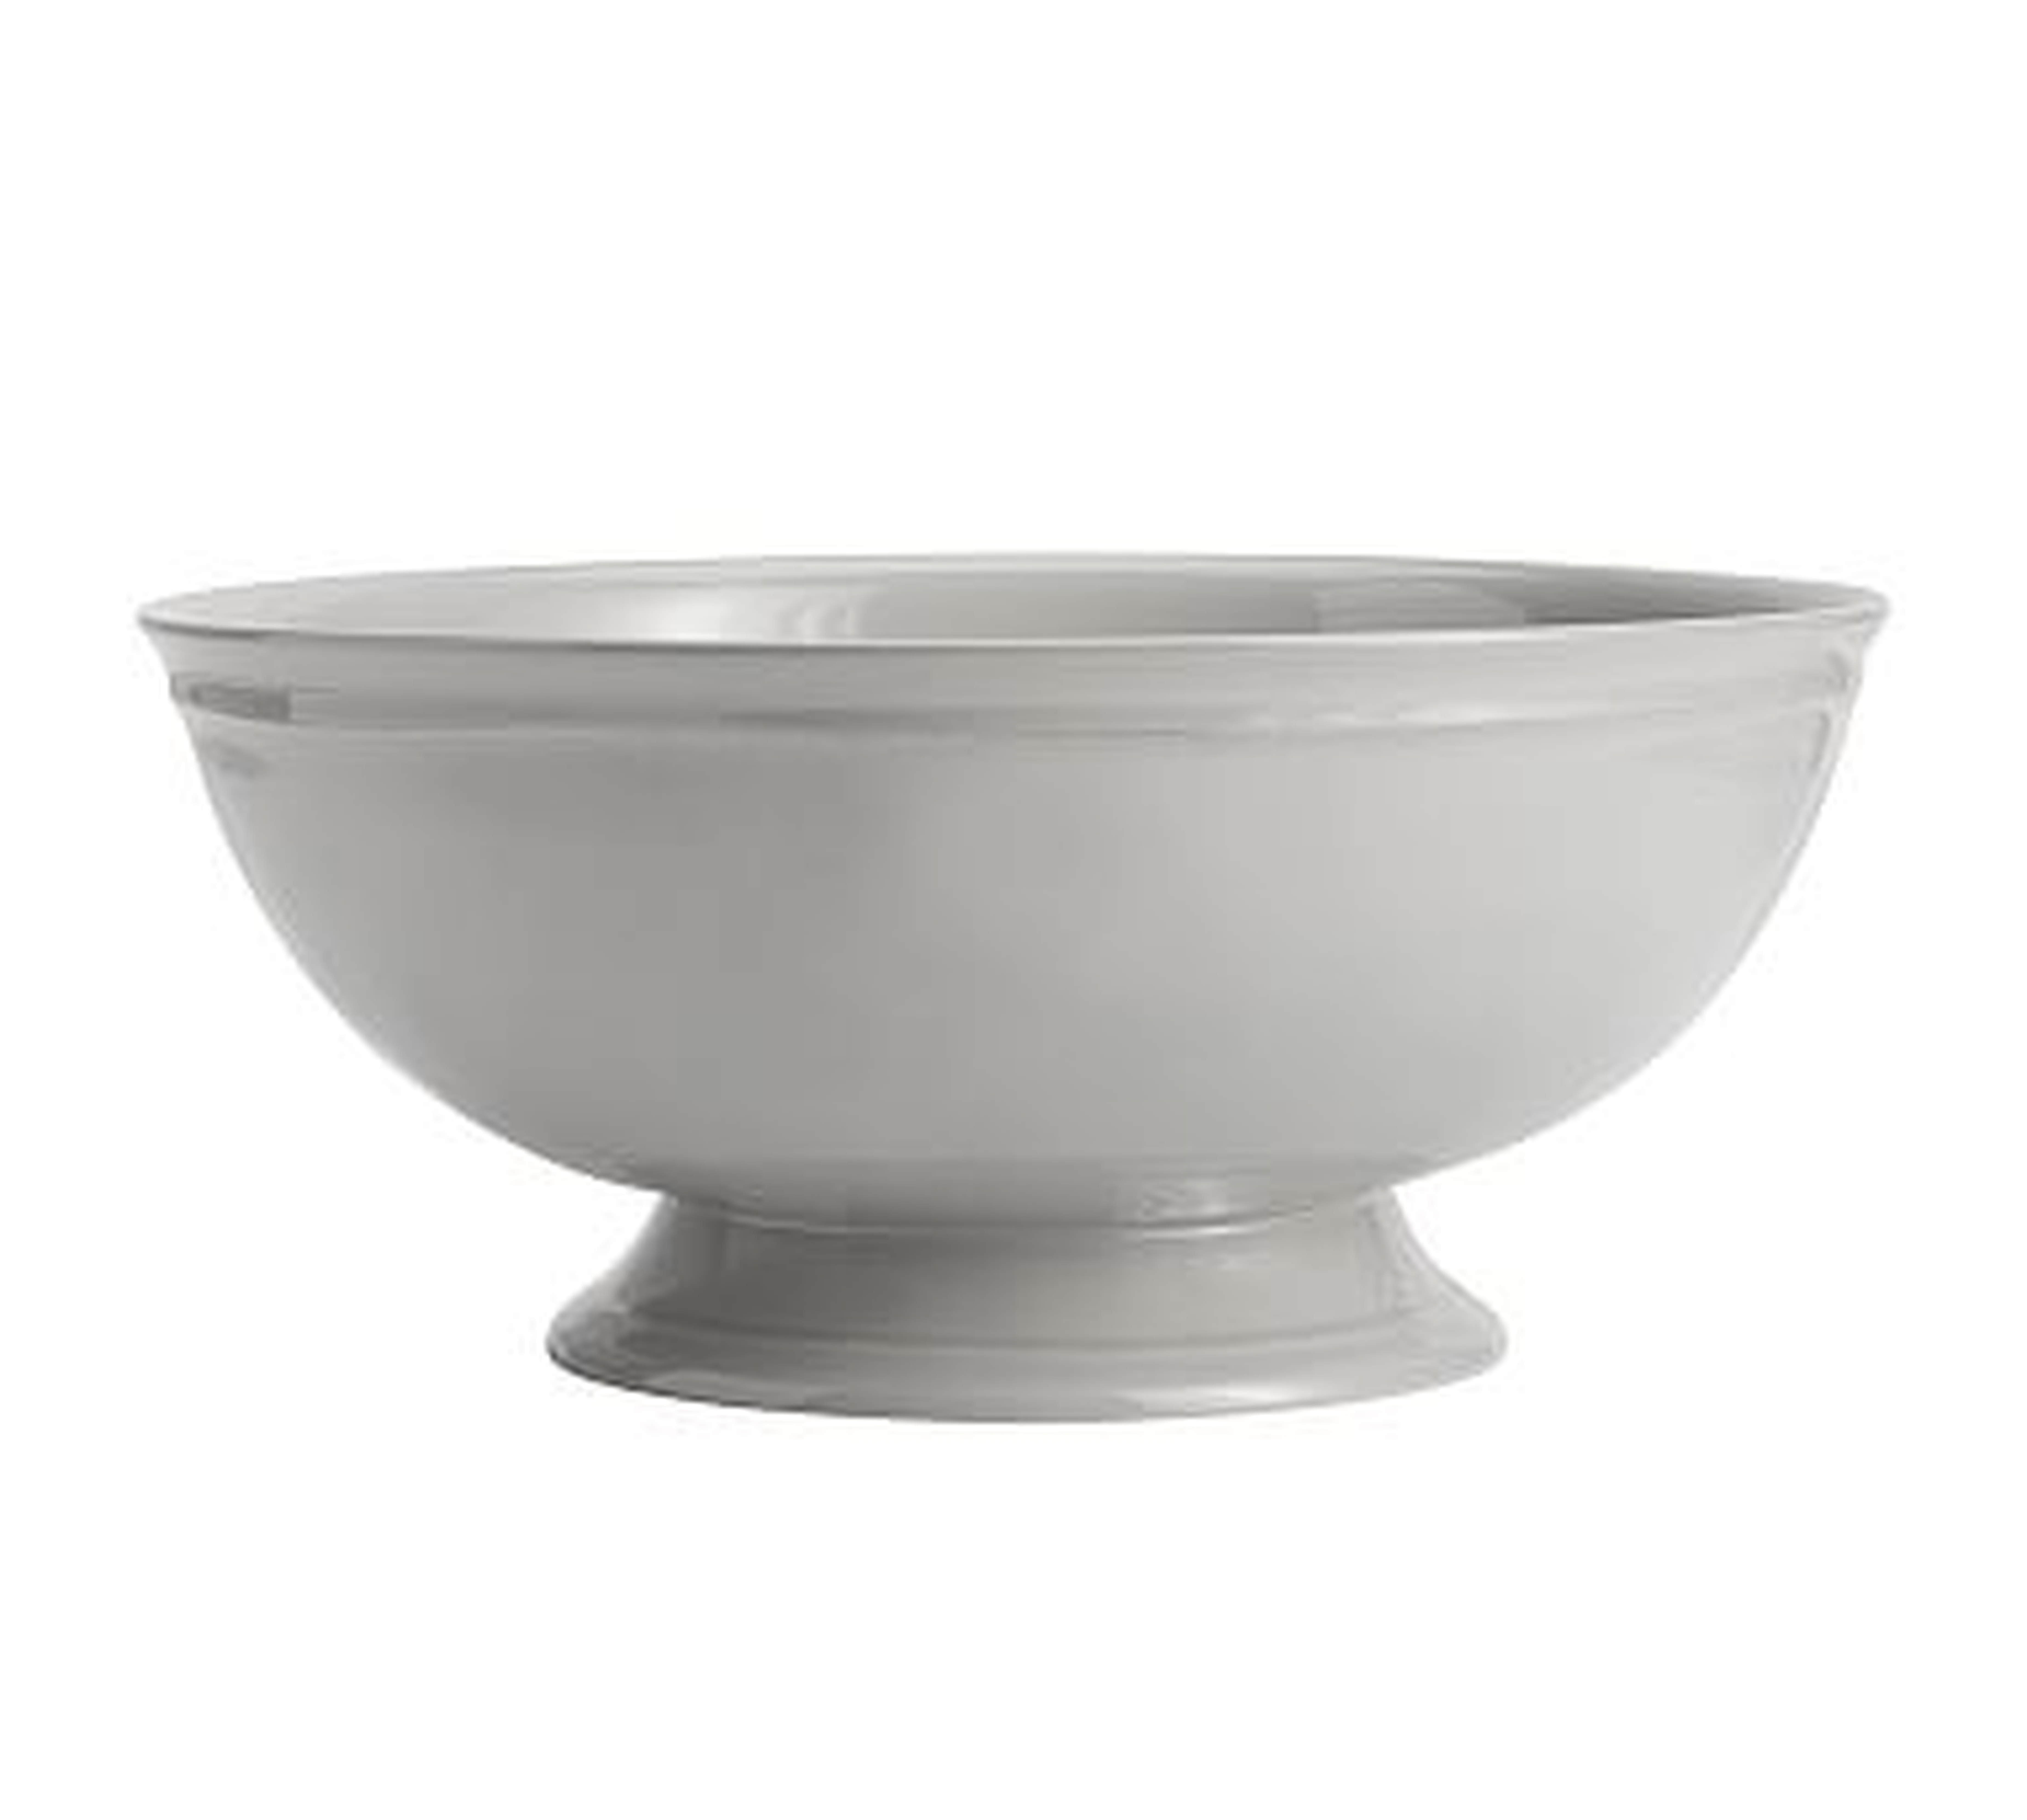 Cambria Stoneware Footed Serving Bowl, Large (12.5"dia. x 5.5"H) - Gray - Pottery Barn